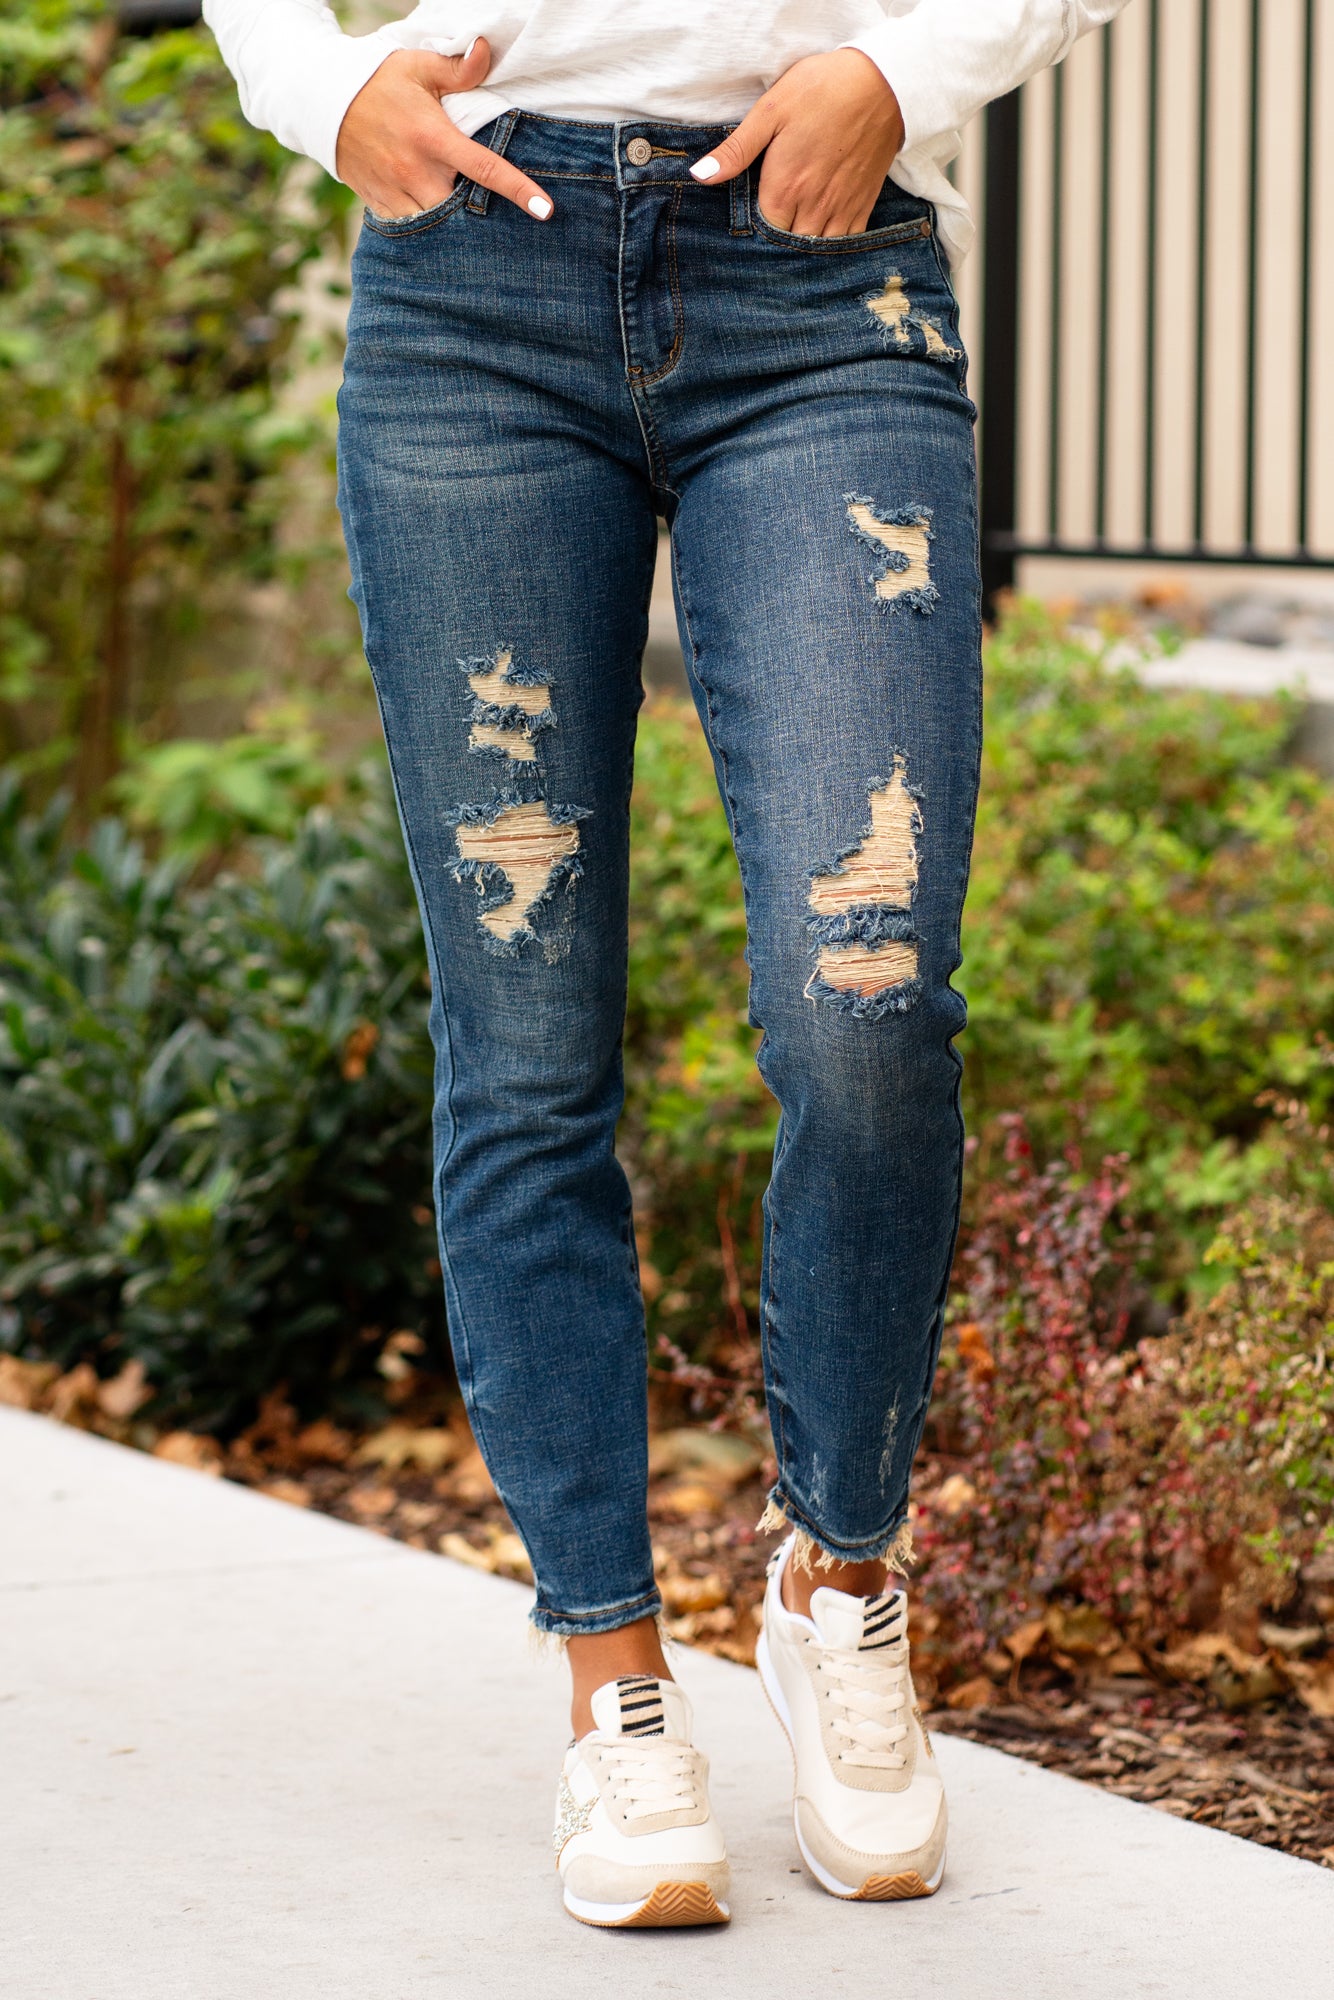 J. Brand Anja Ankle Cuff Jeans in Moonlight Blue